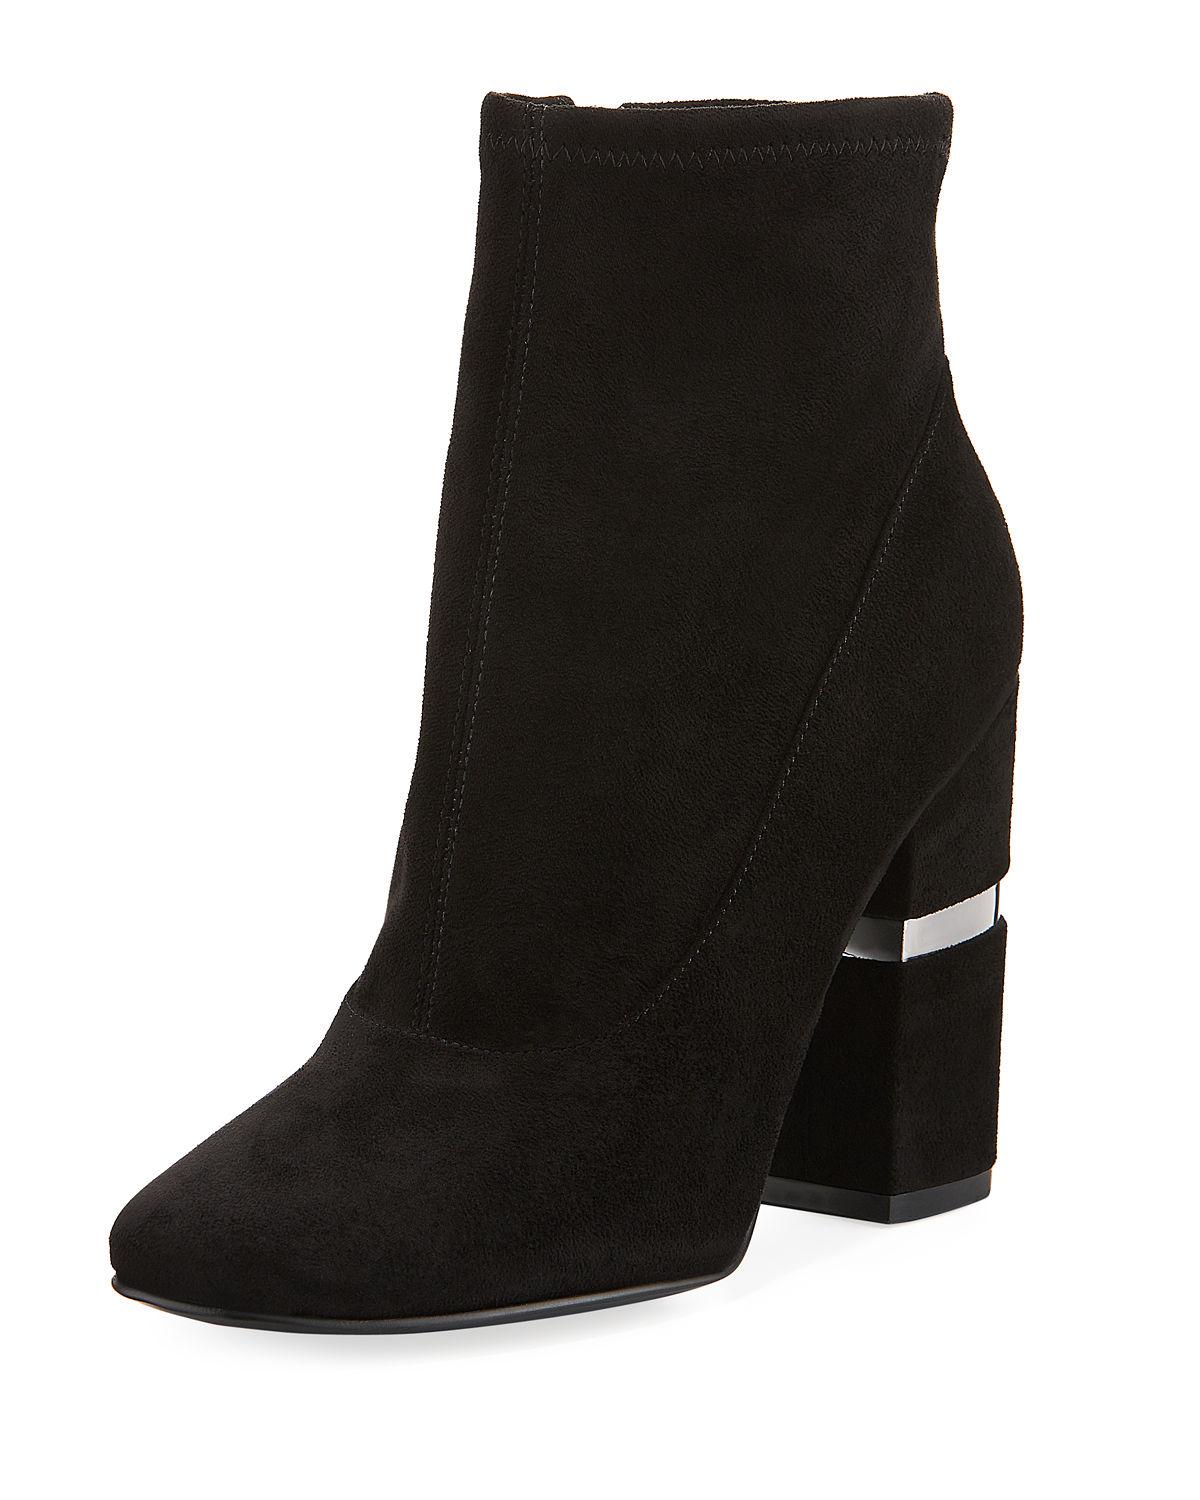 Lyst - Marc Fisher Padda Faux-suede Bootie in Black - Save 10%